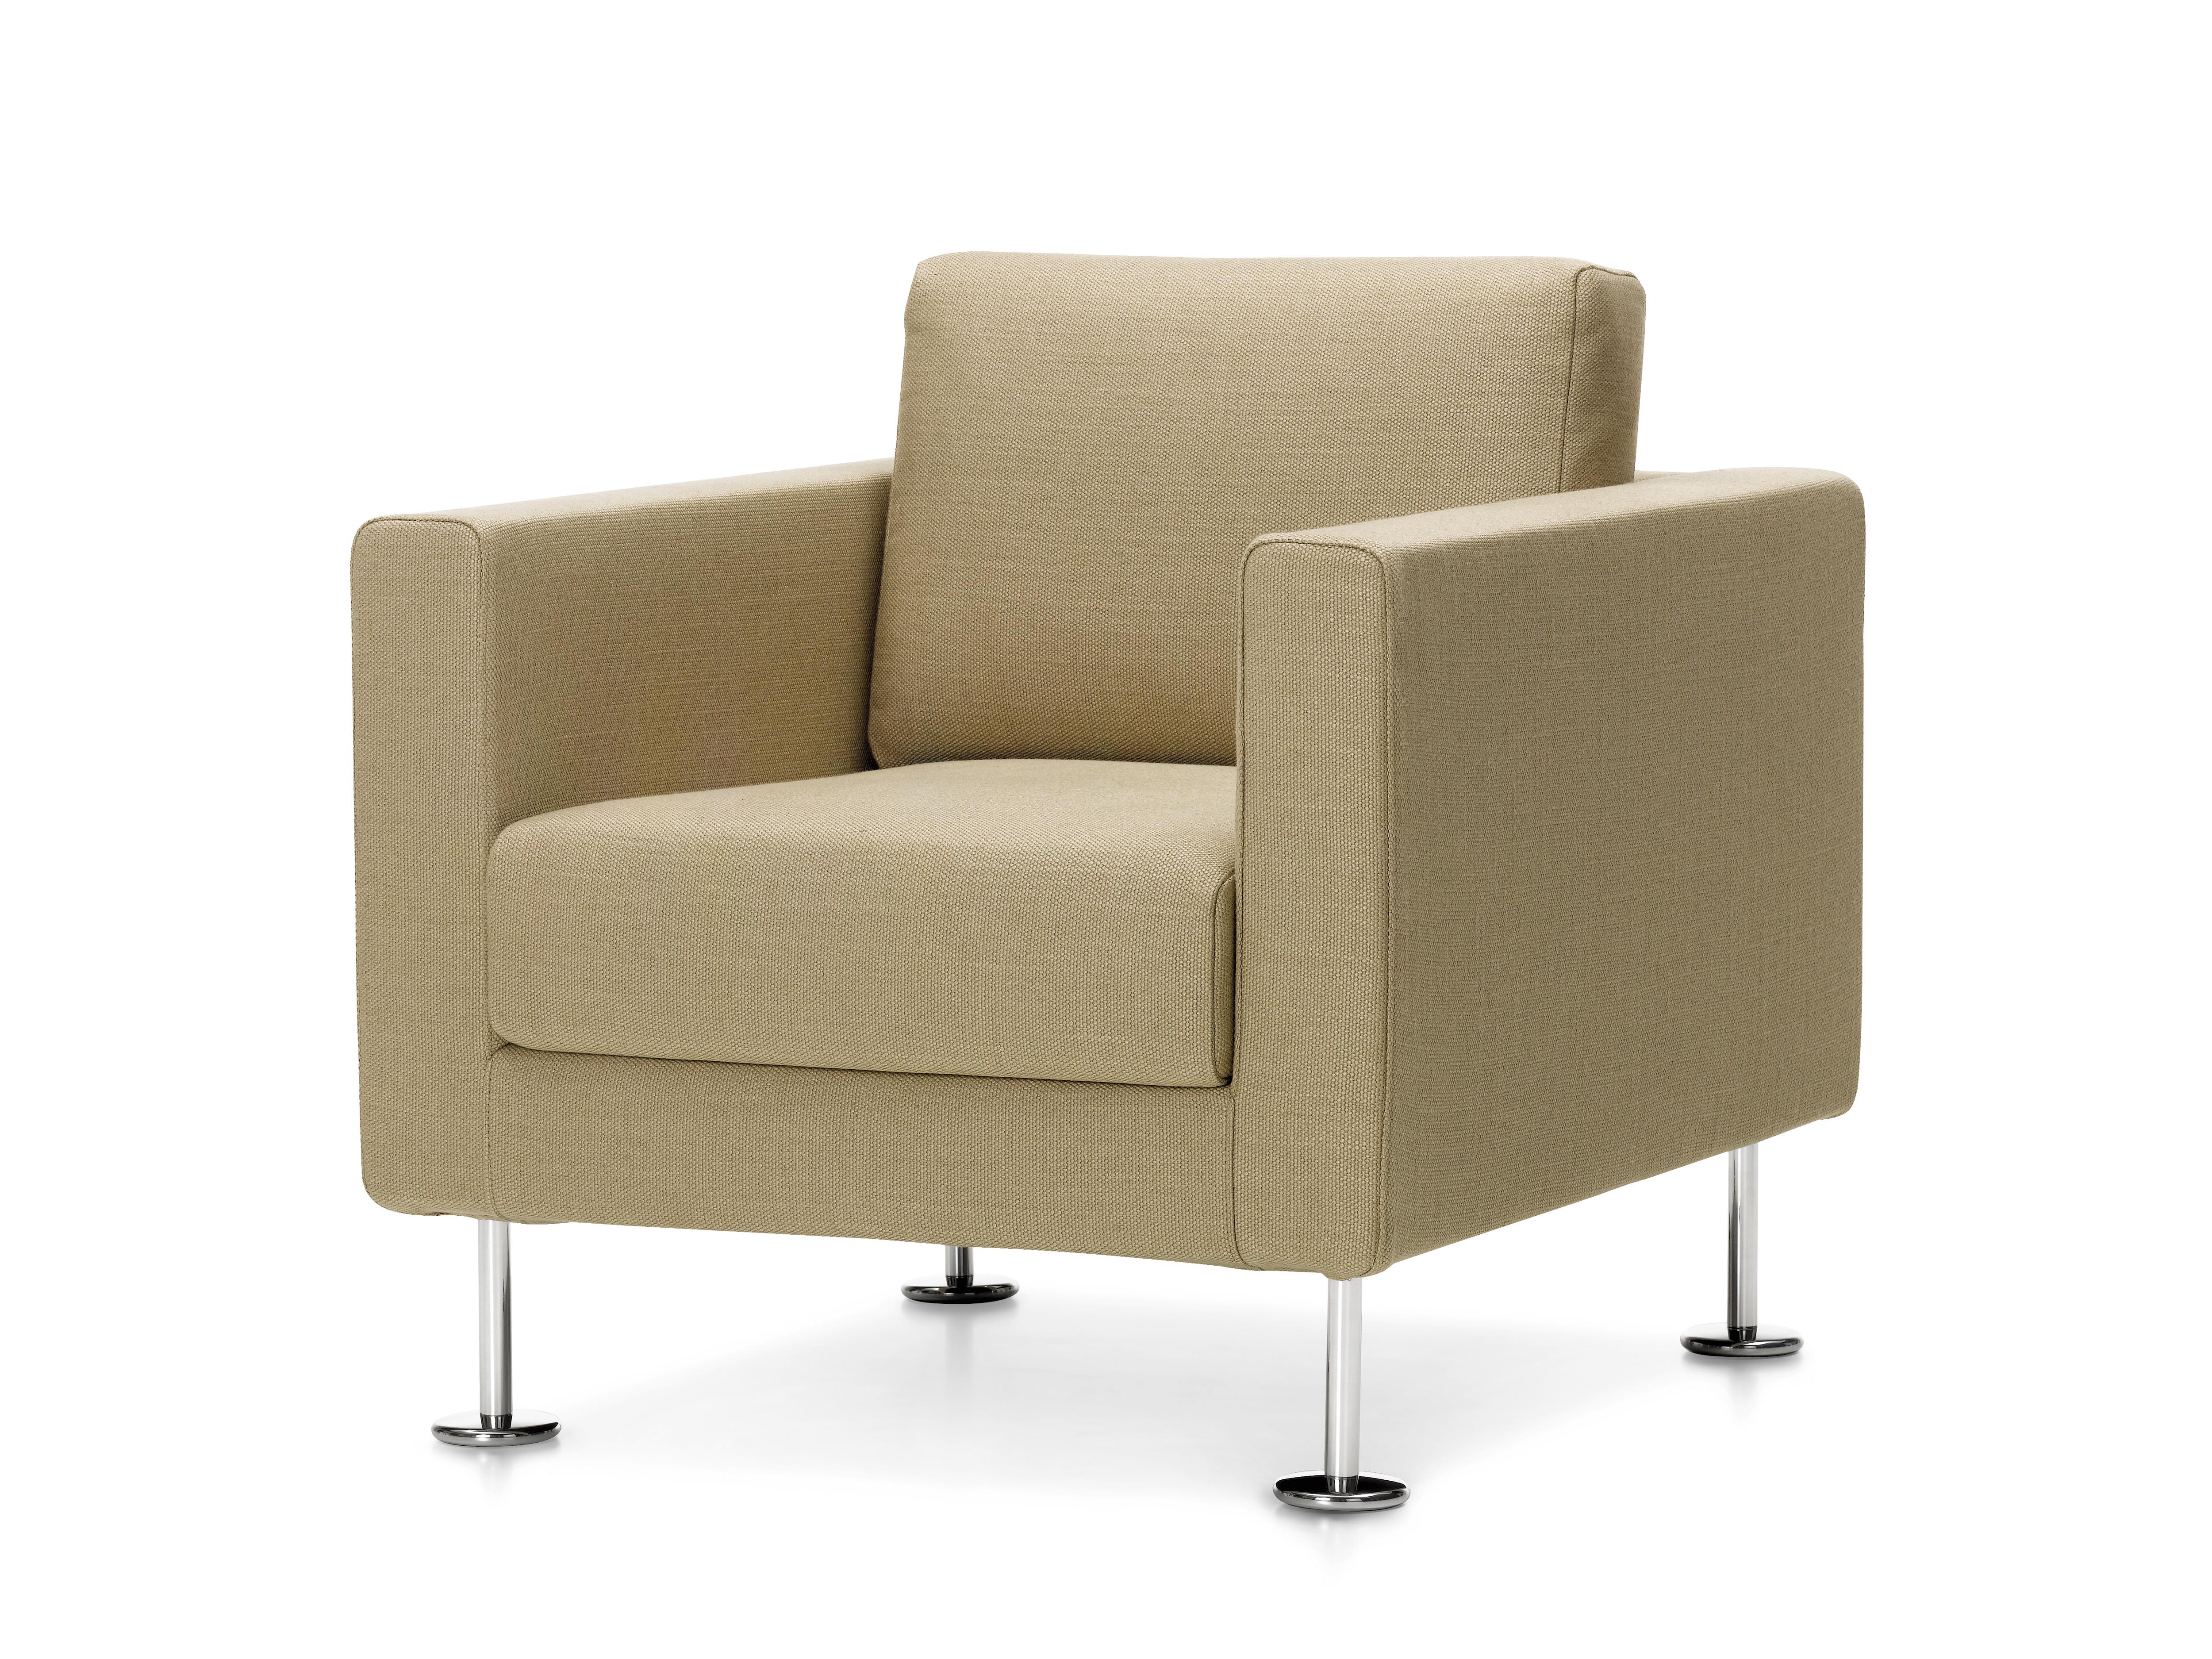 These items are only available in the United States.

These products are only available in the United States.

 With their simple, clean lines and cubic Park Sofa shapes, the models in the Park Family exemplify the classic modern tradition of